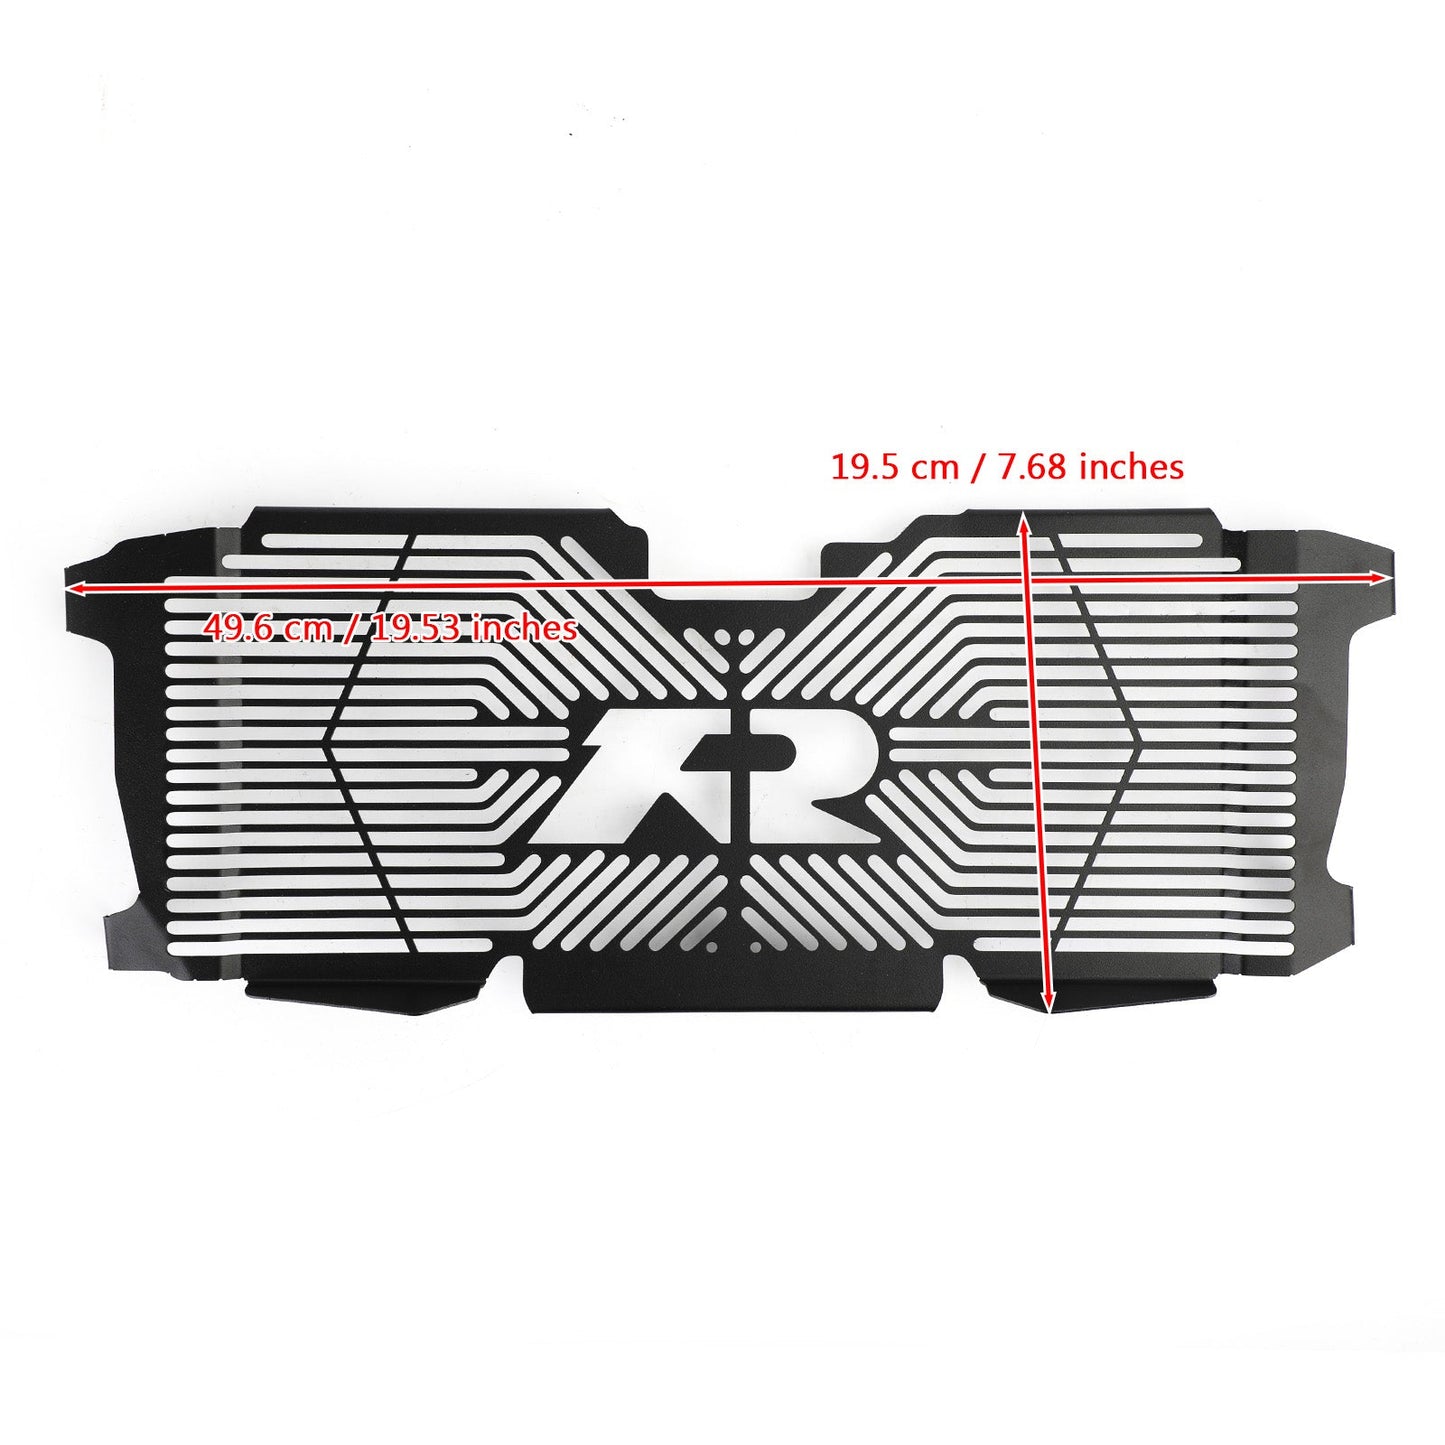 Stainless Steel Radiator Guard Protector Grill Cover Fit For BMW R1200RS R1250RS R1200R 15-20